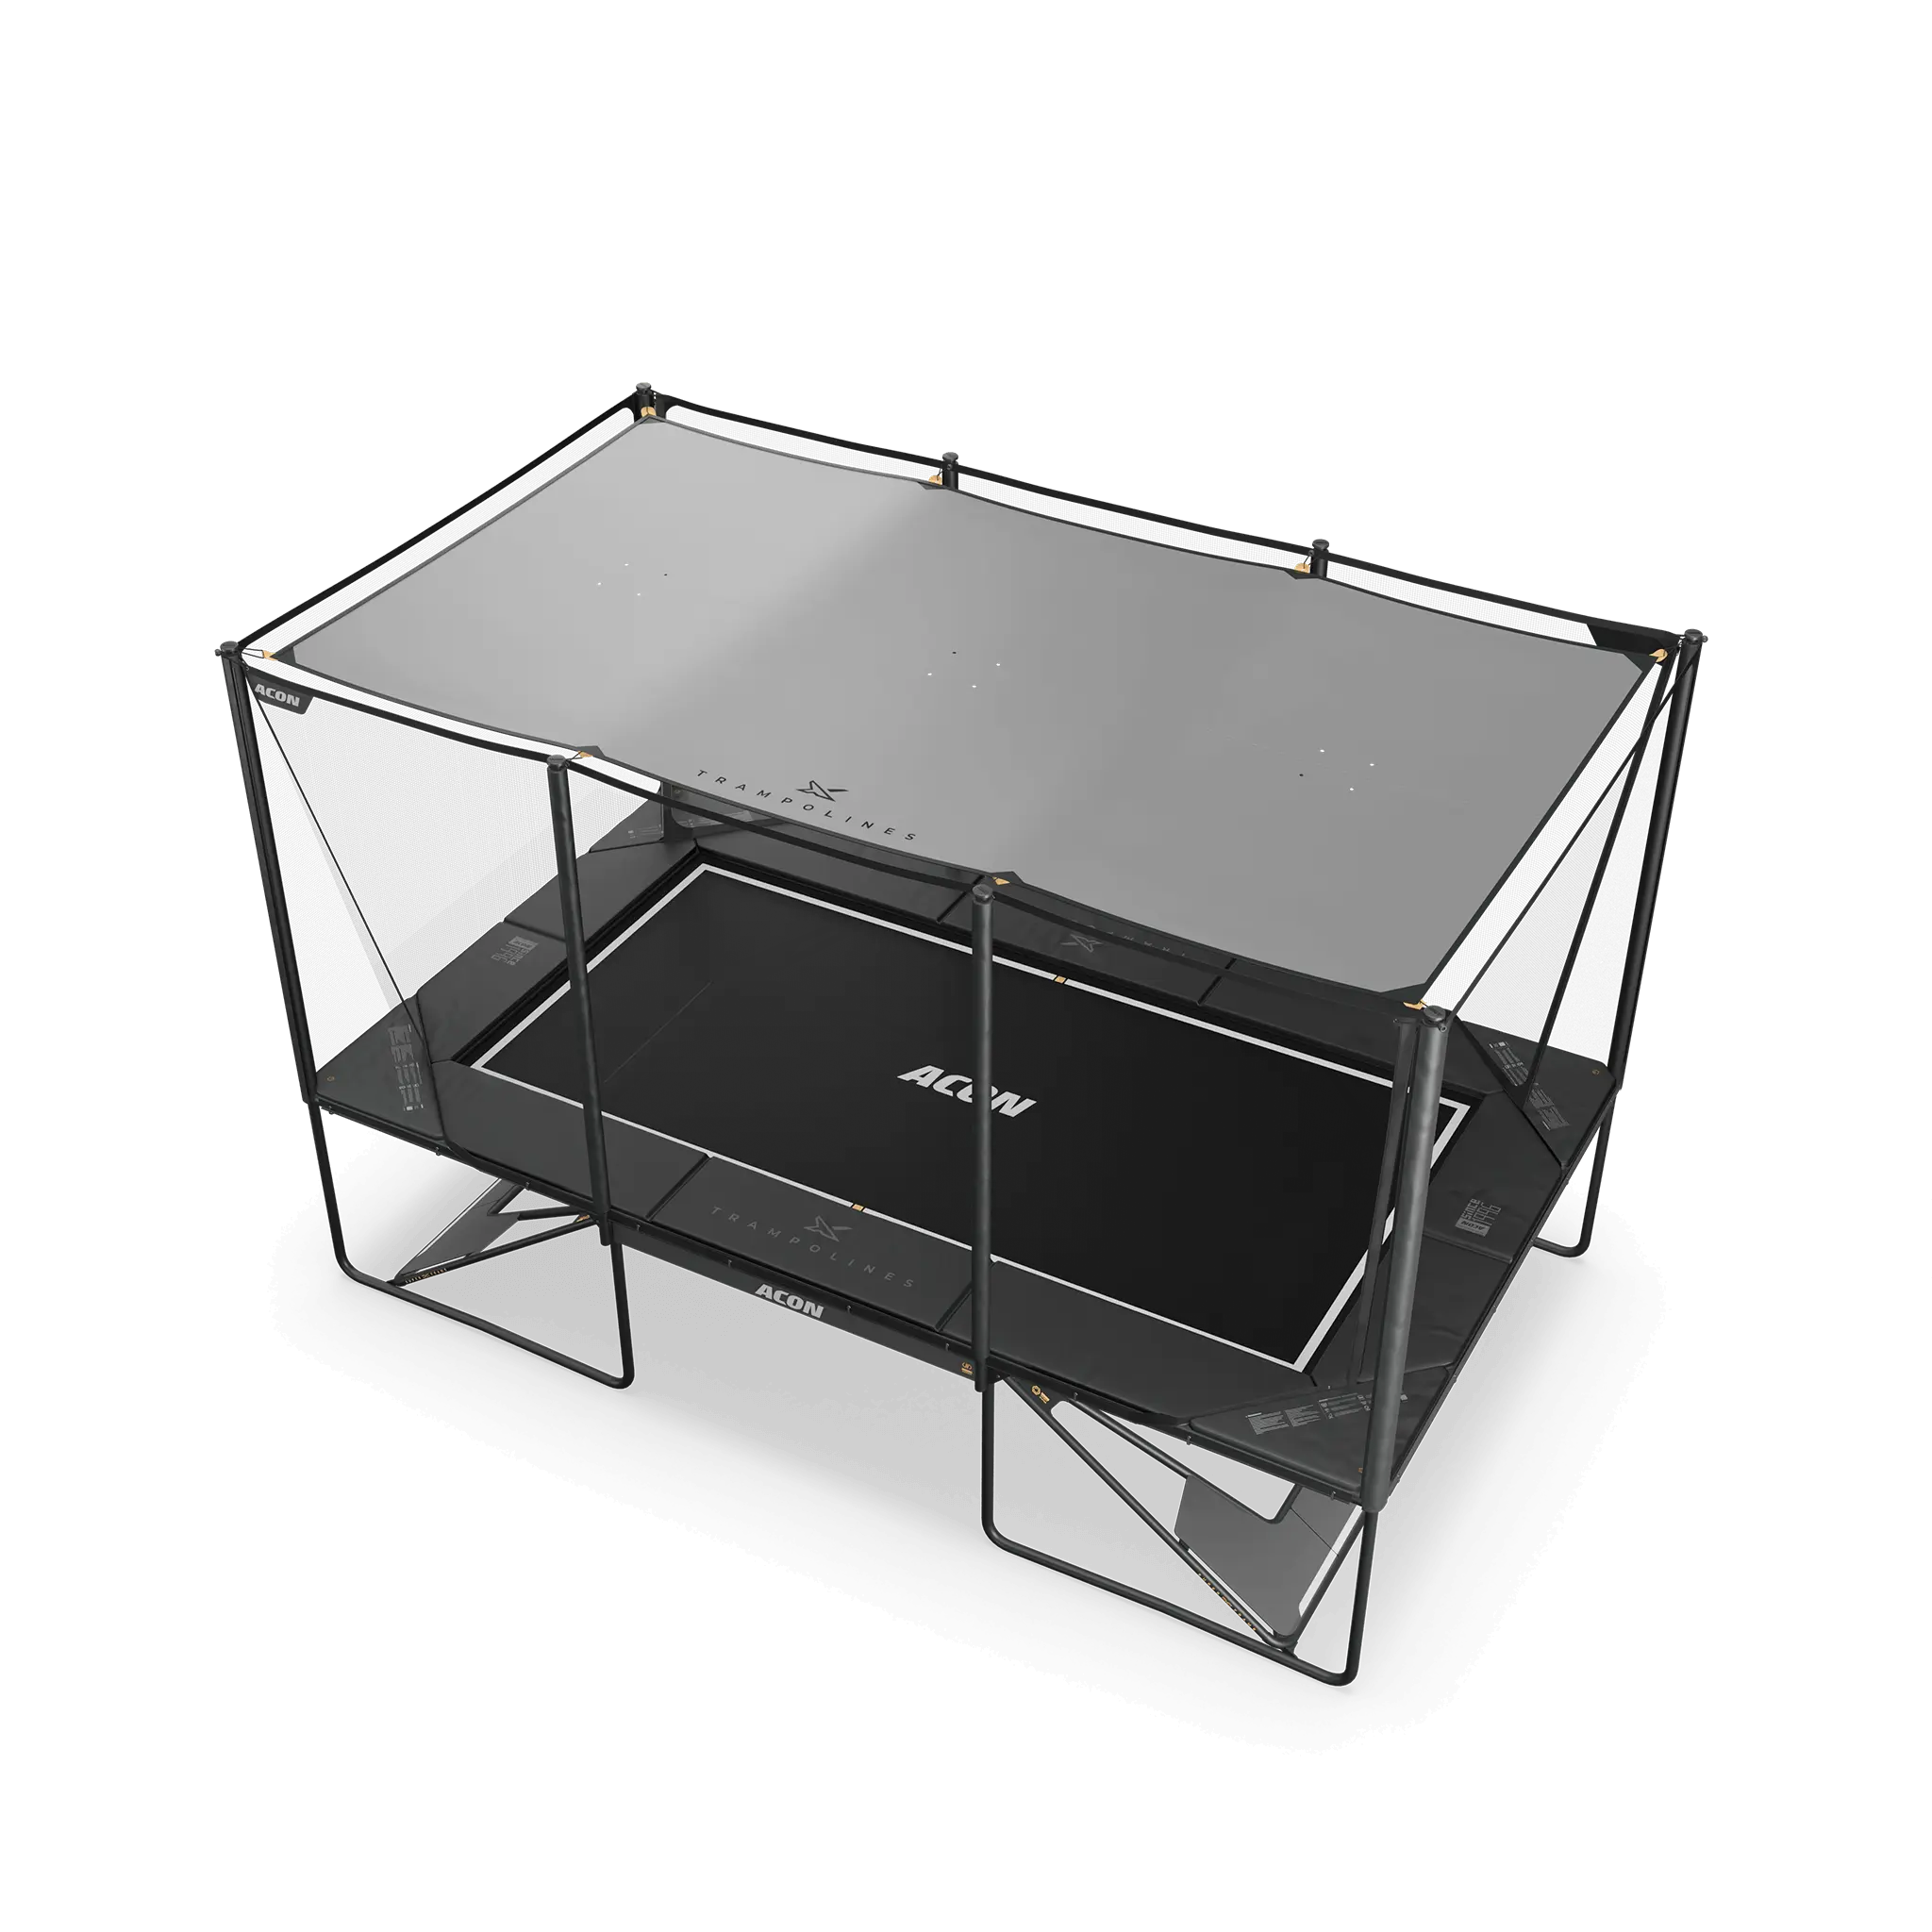 Acon X Trampoline, Shade assembled on the top, metallic colour side up.